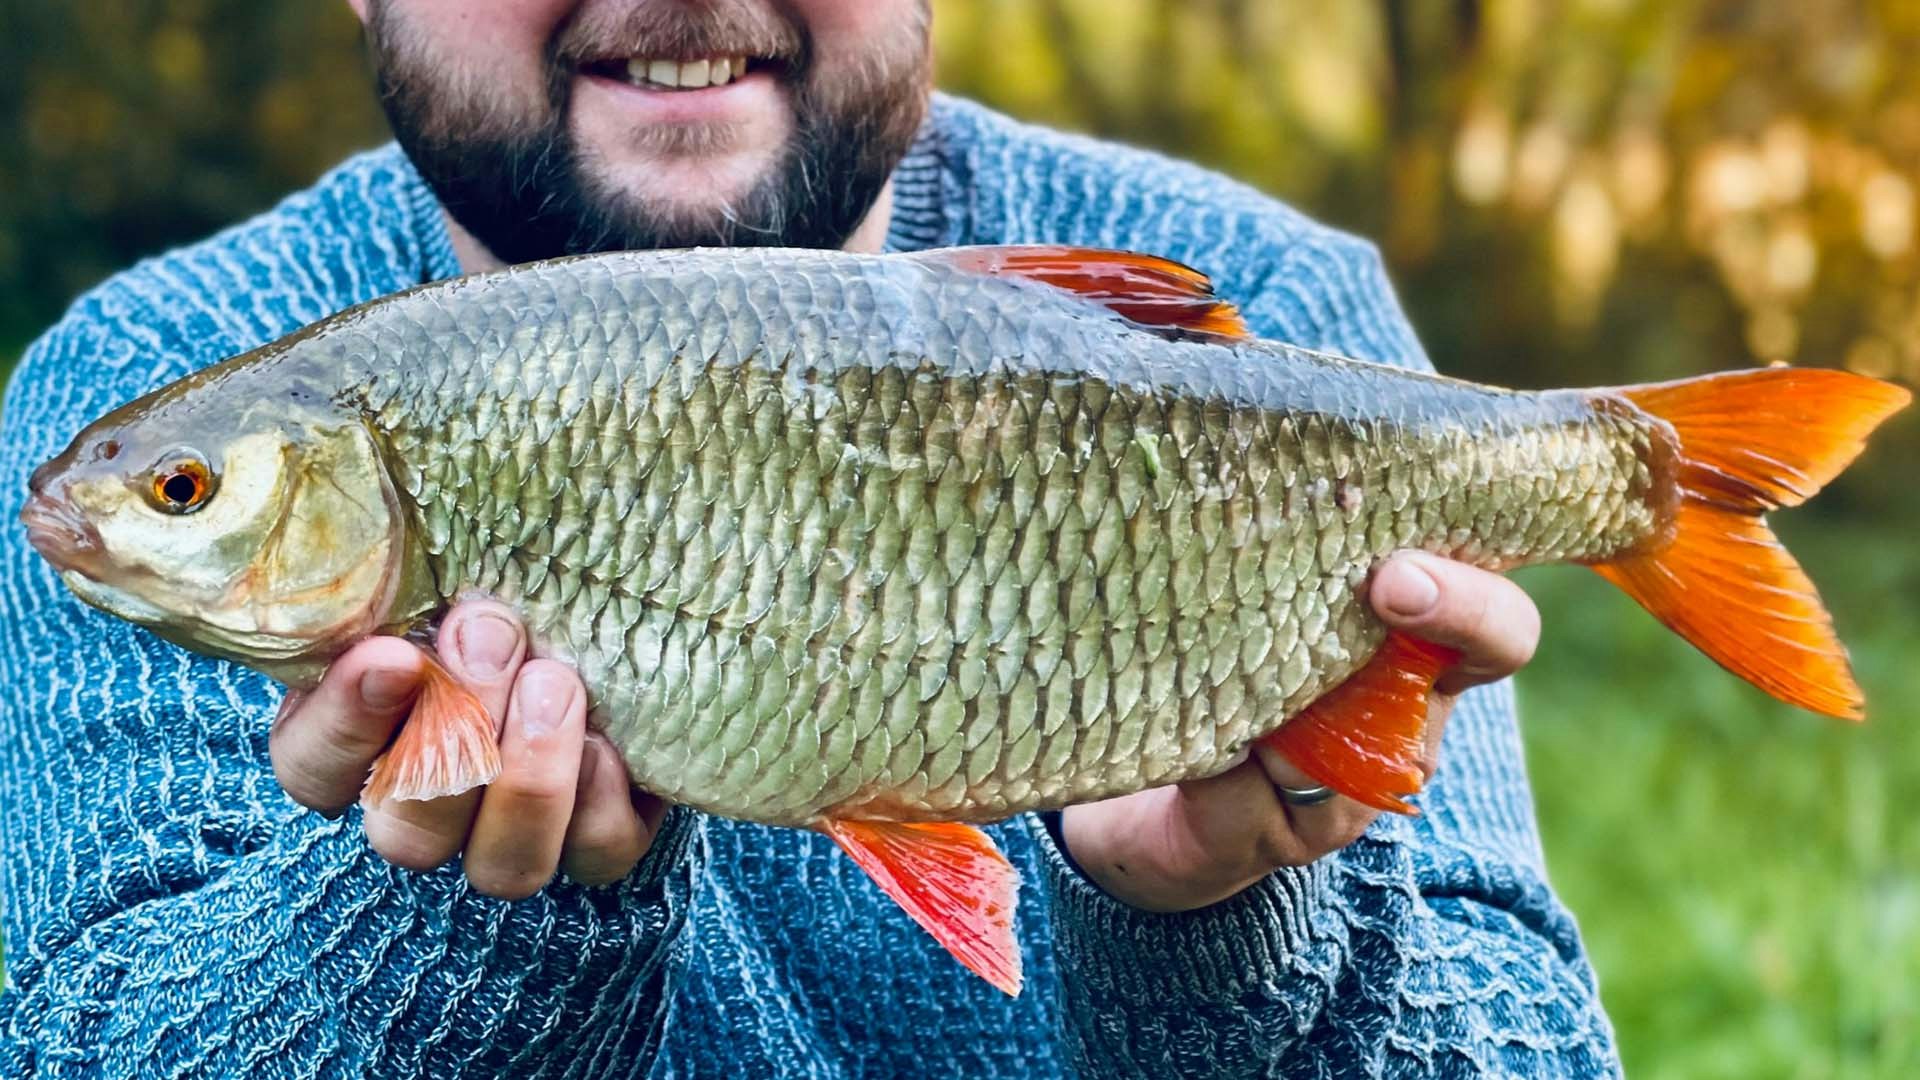 Stunning gravel pit roach is a new PB